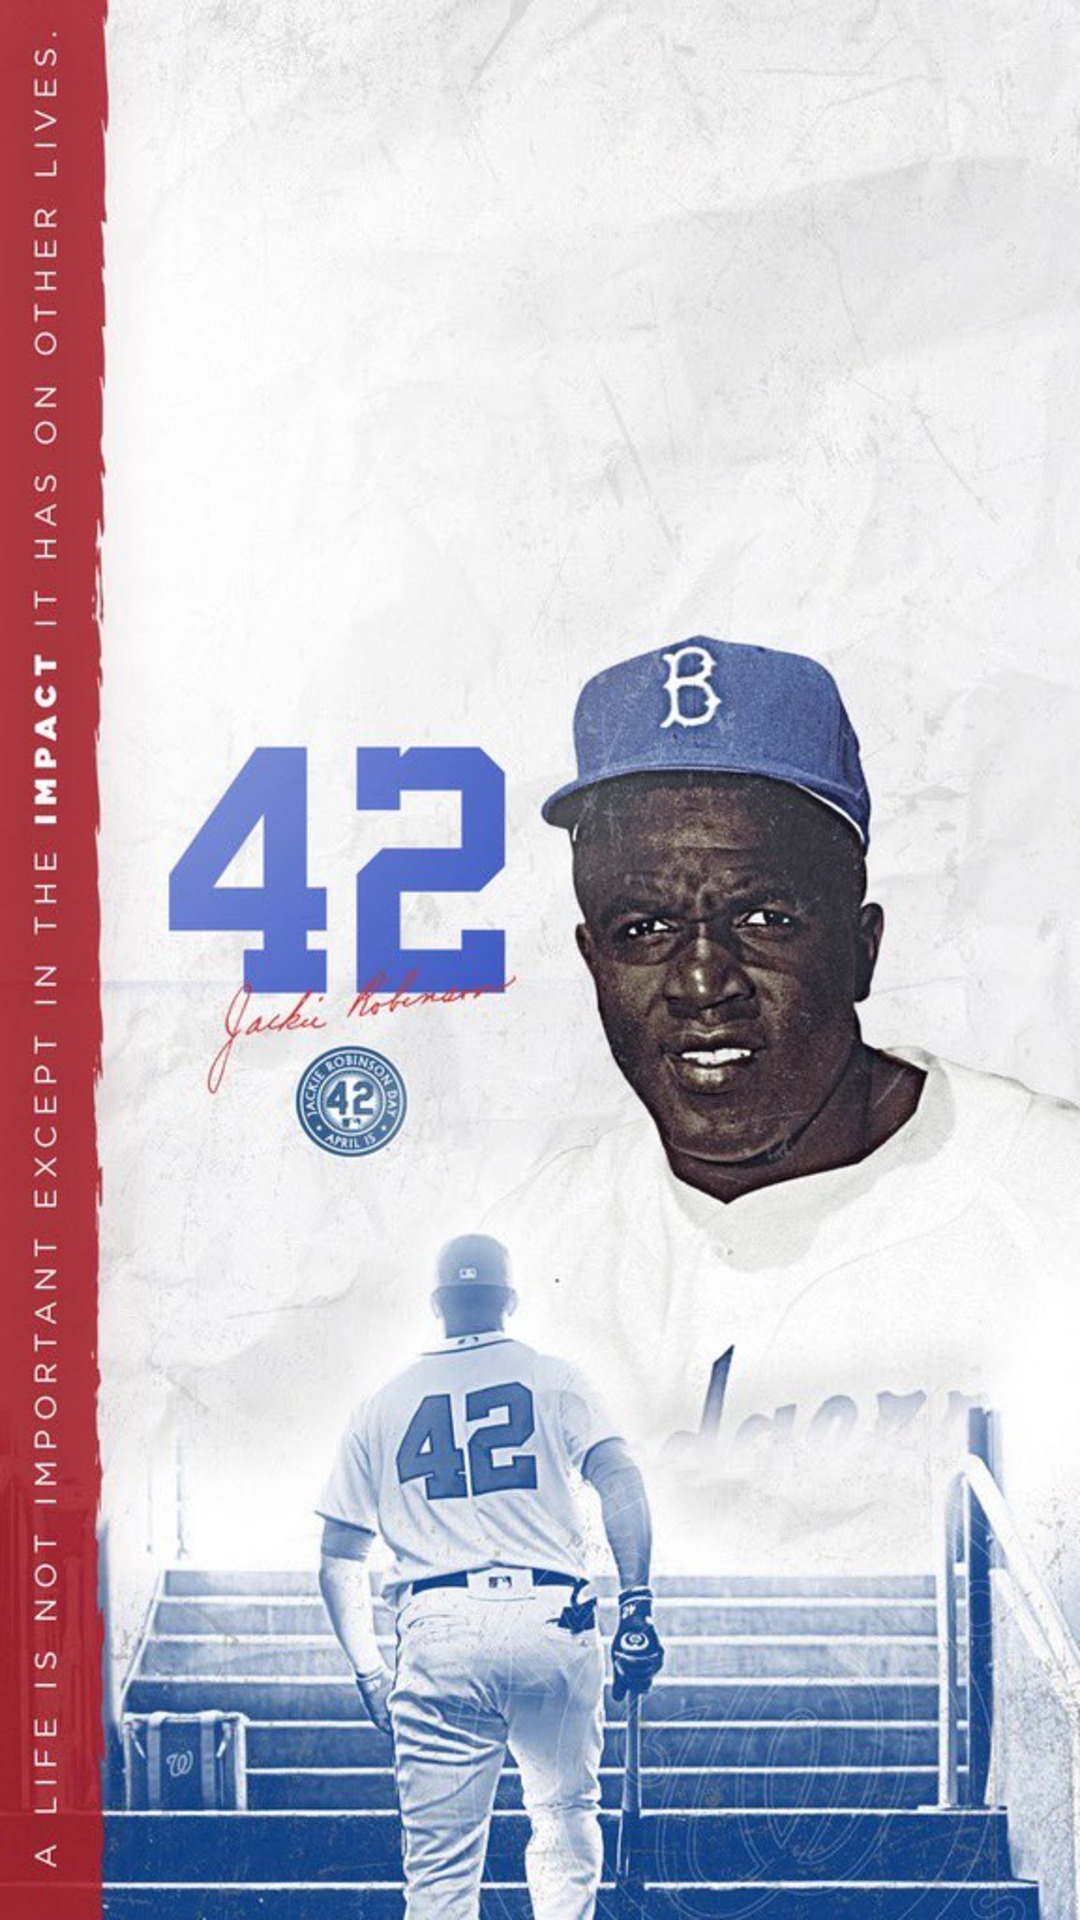 Jackie Robinson Wallpapers